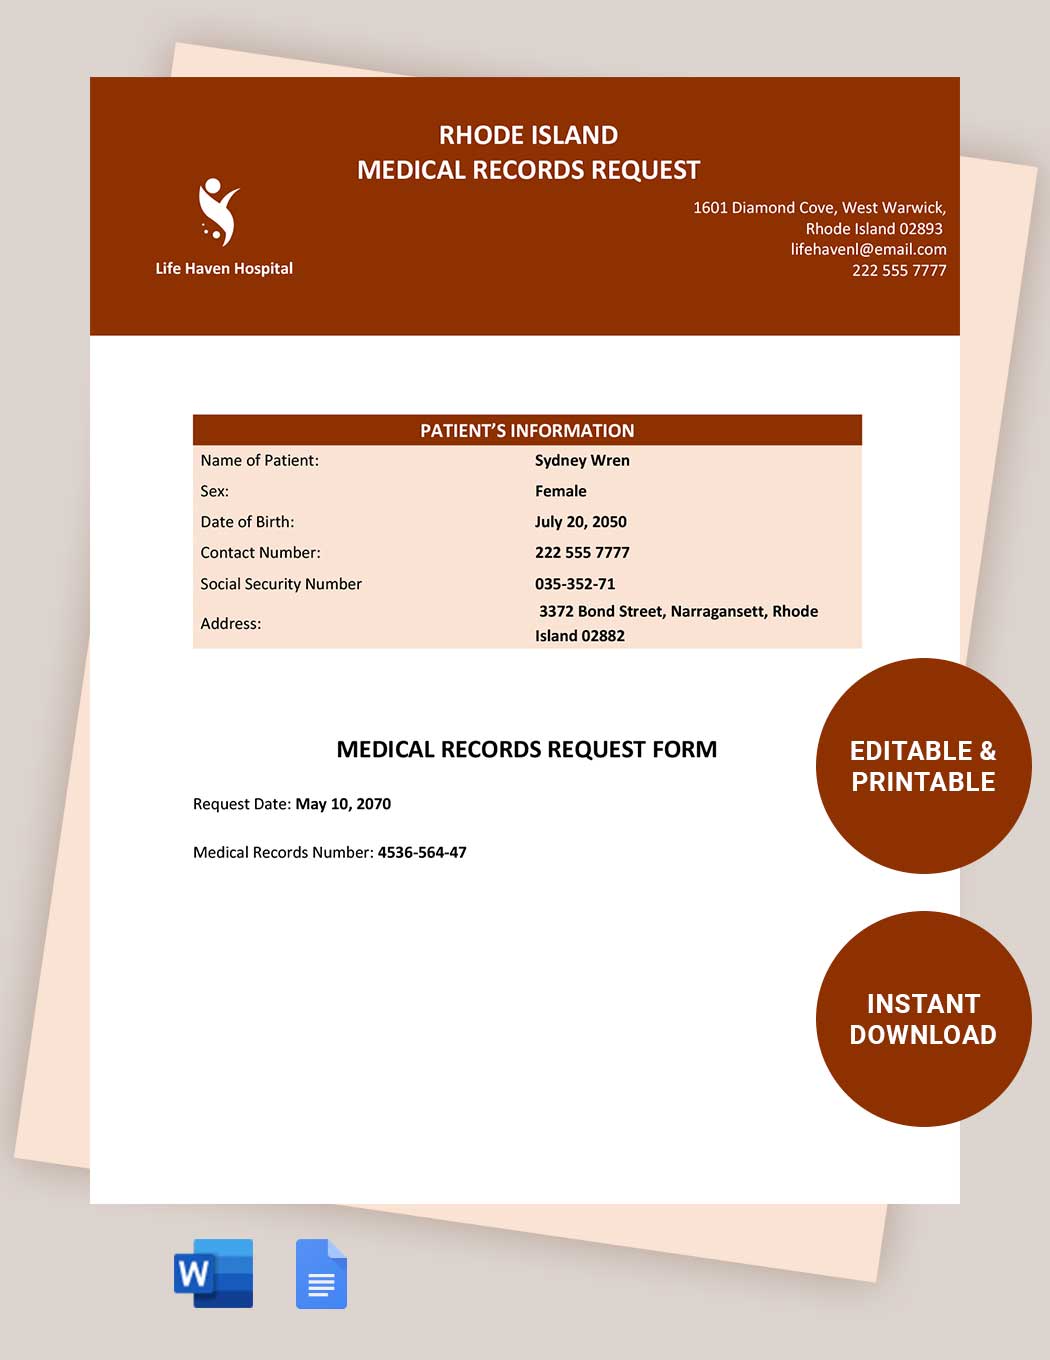 Rhode Island Medical Records Request Template in Word, Google Docs